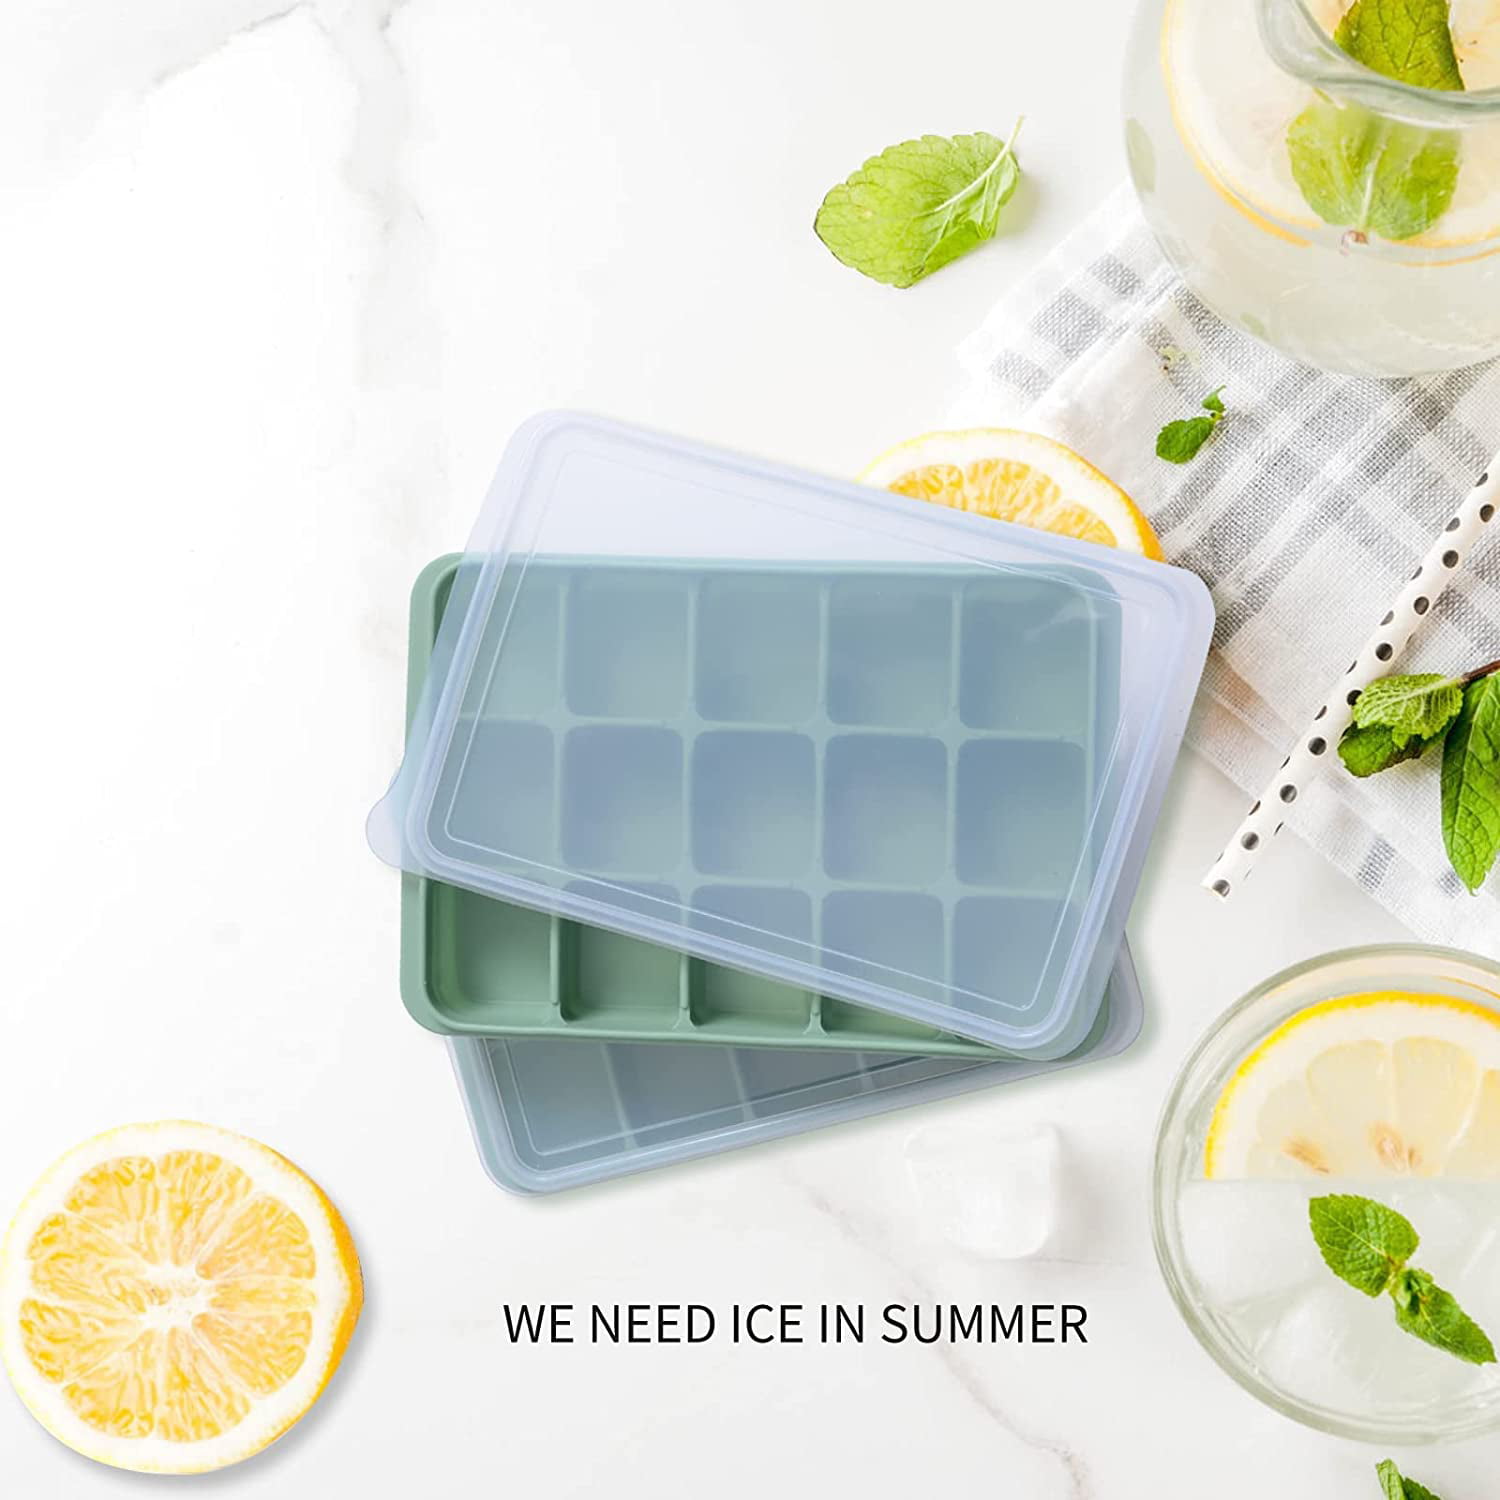 AYI&AYEE Silicone Ice Cube Trays with Lids - 2 Pack - 24 Cavities 1 inch  (1.2 tbsp / 20ml / 0.6 fl oz) Square Ice Cubes Baking Molds - BPA free -  Easy